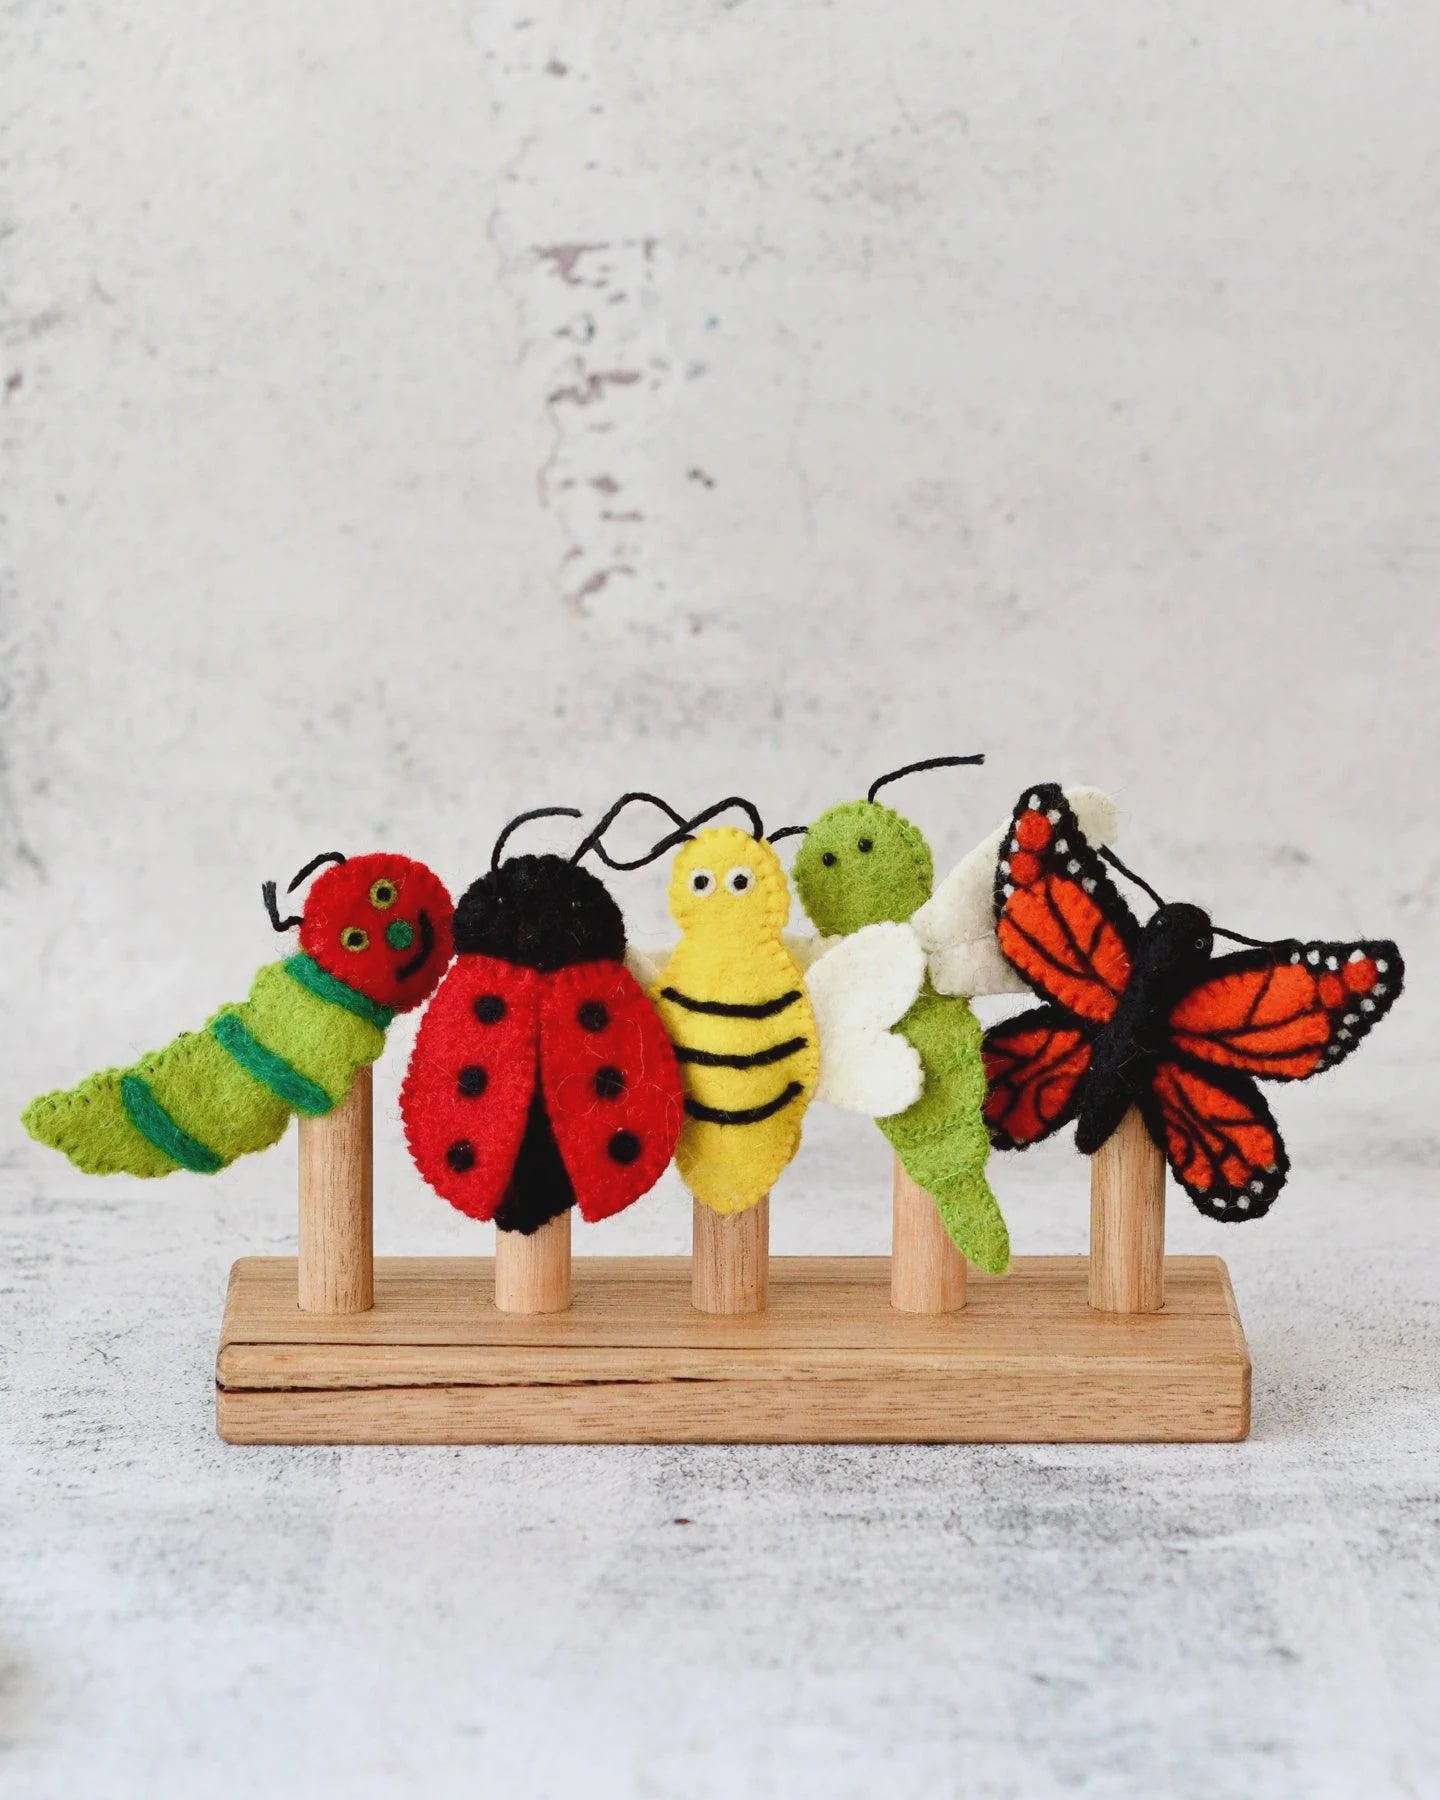 Tara Treasures - Finger Puppet Set - Insects and Bugs